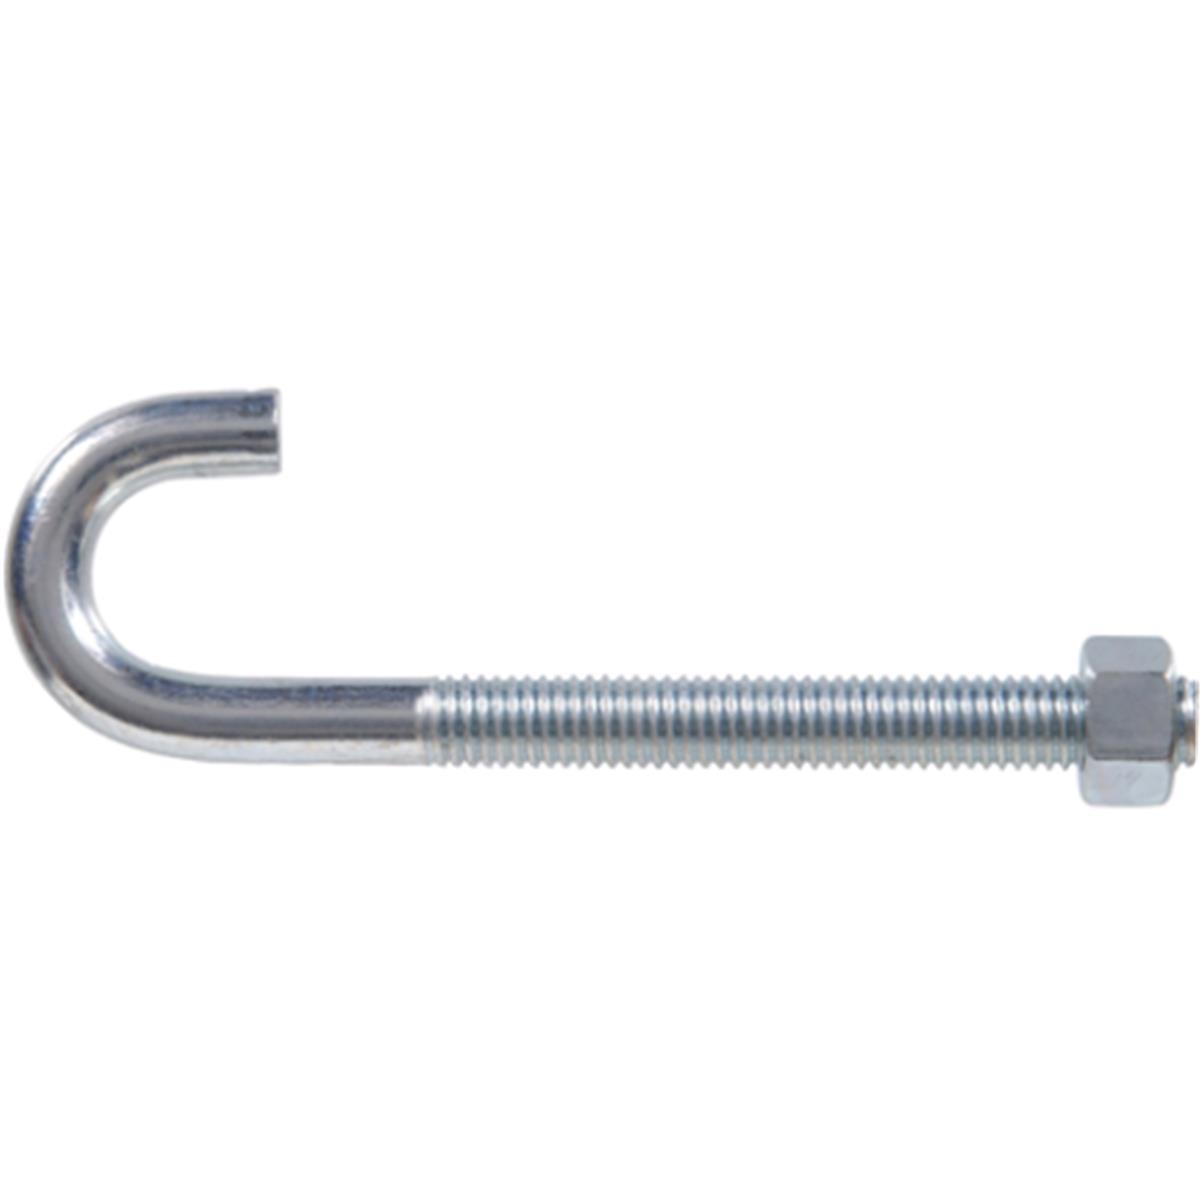 0.31 X 5 In. Zinc Plated J-bolt, Pack Of 10